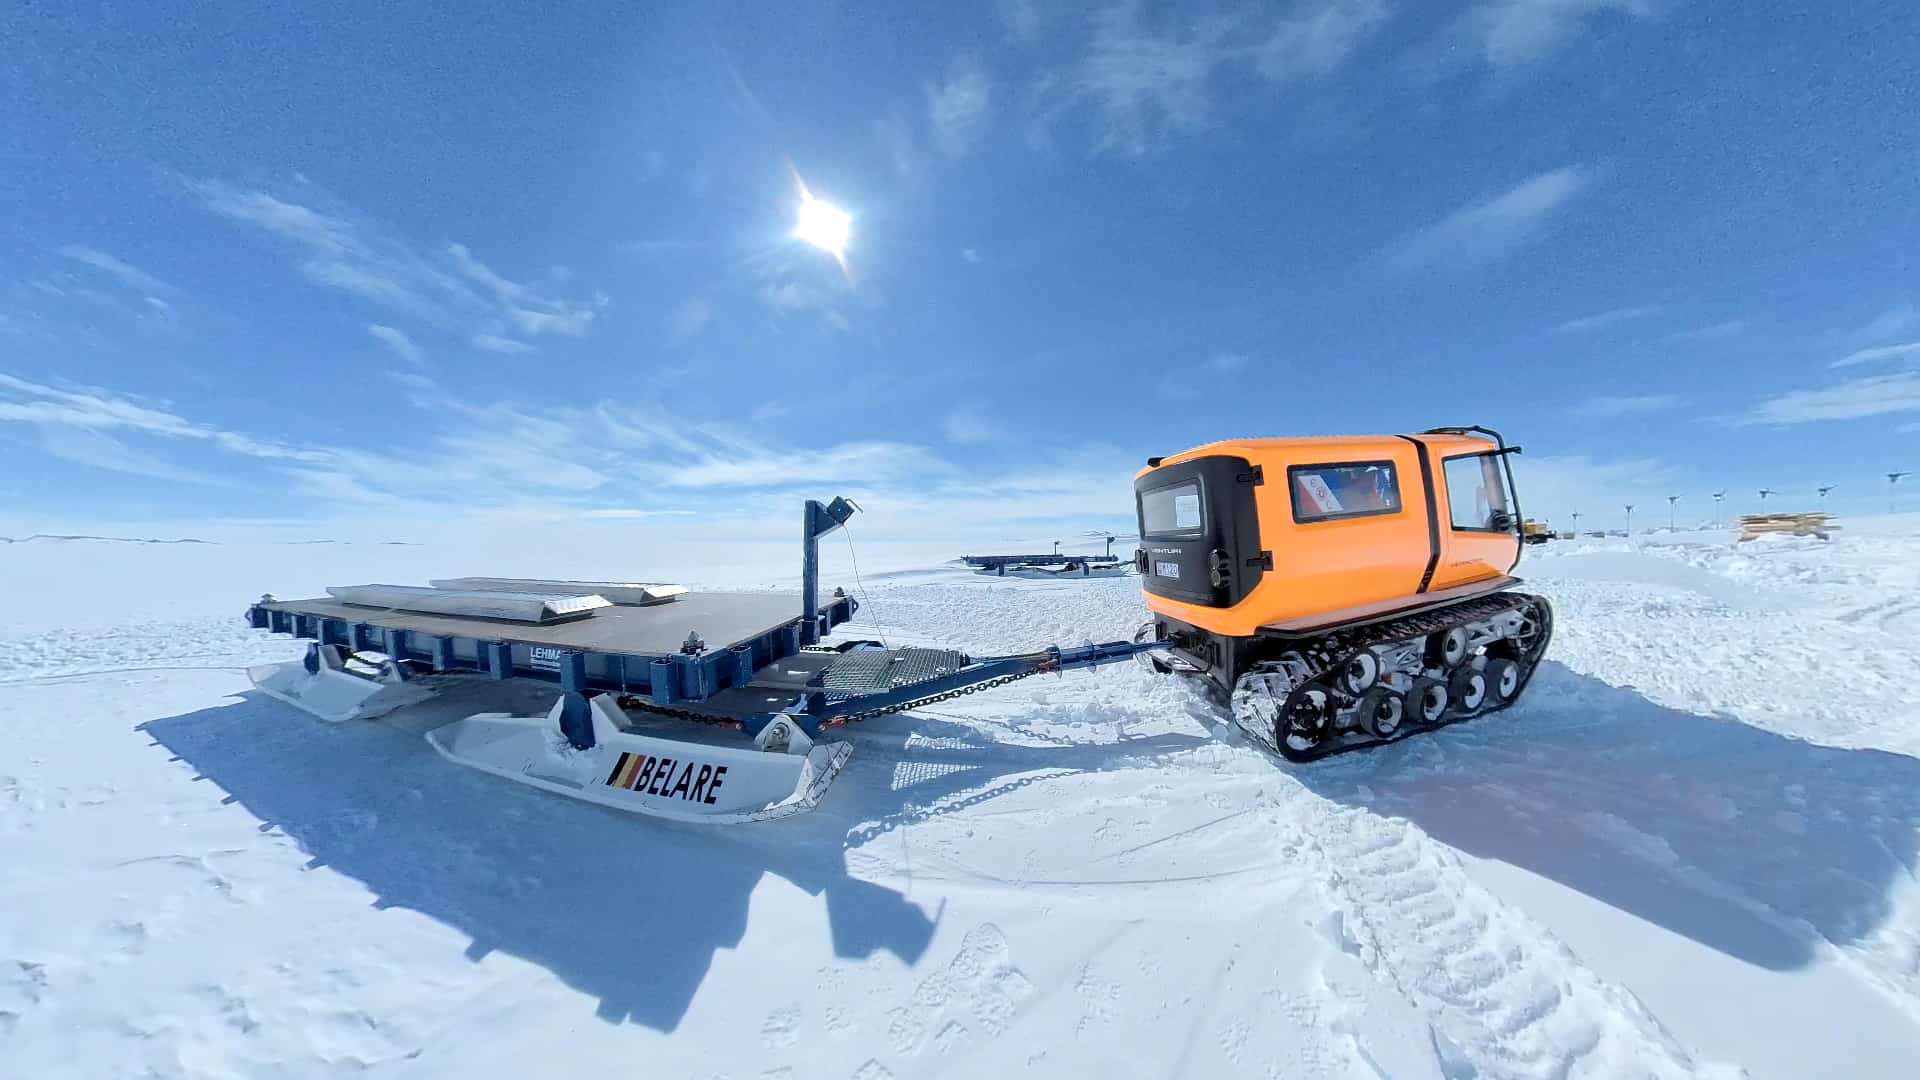 Polar vehicle Venturi upgrades for its second year in operation